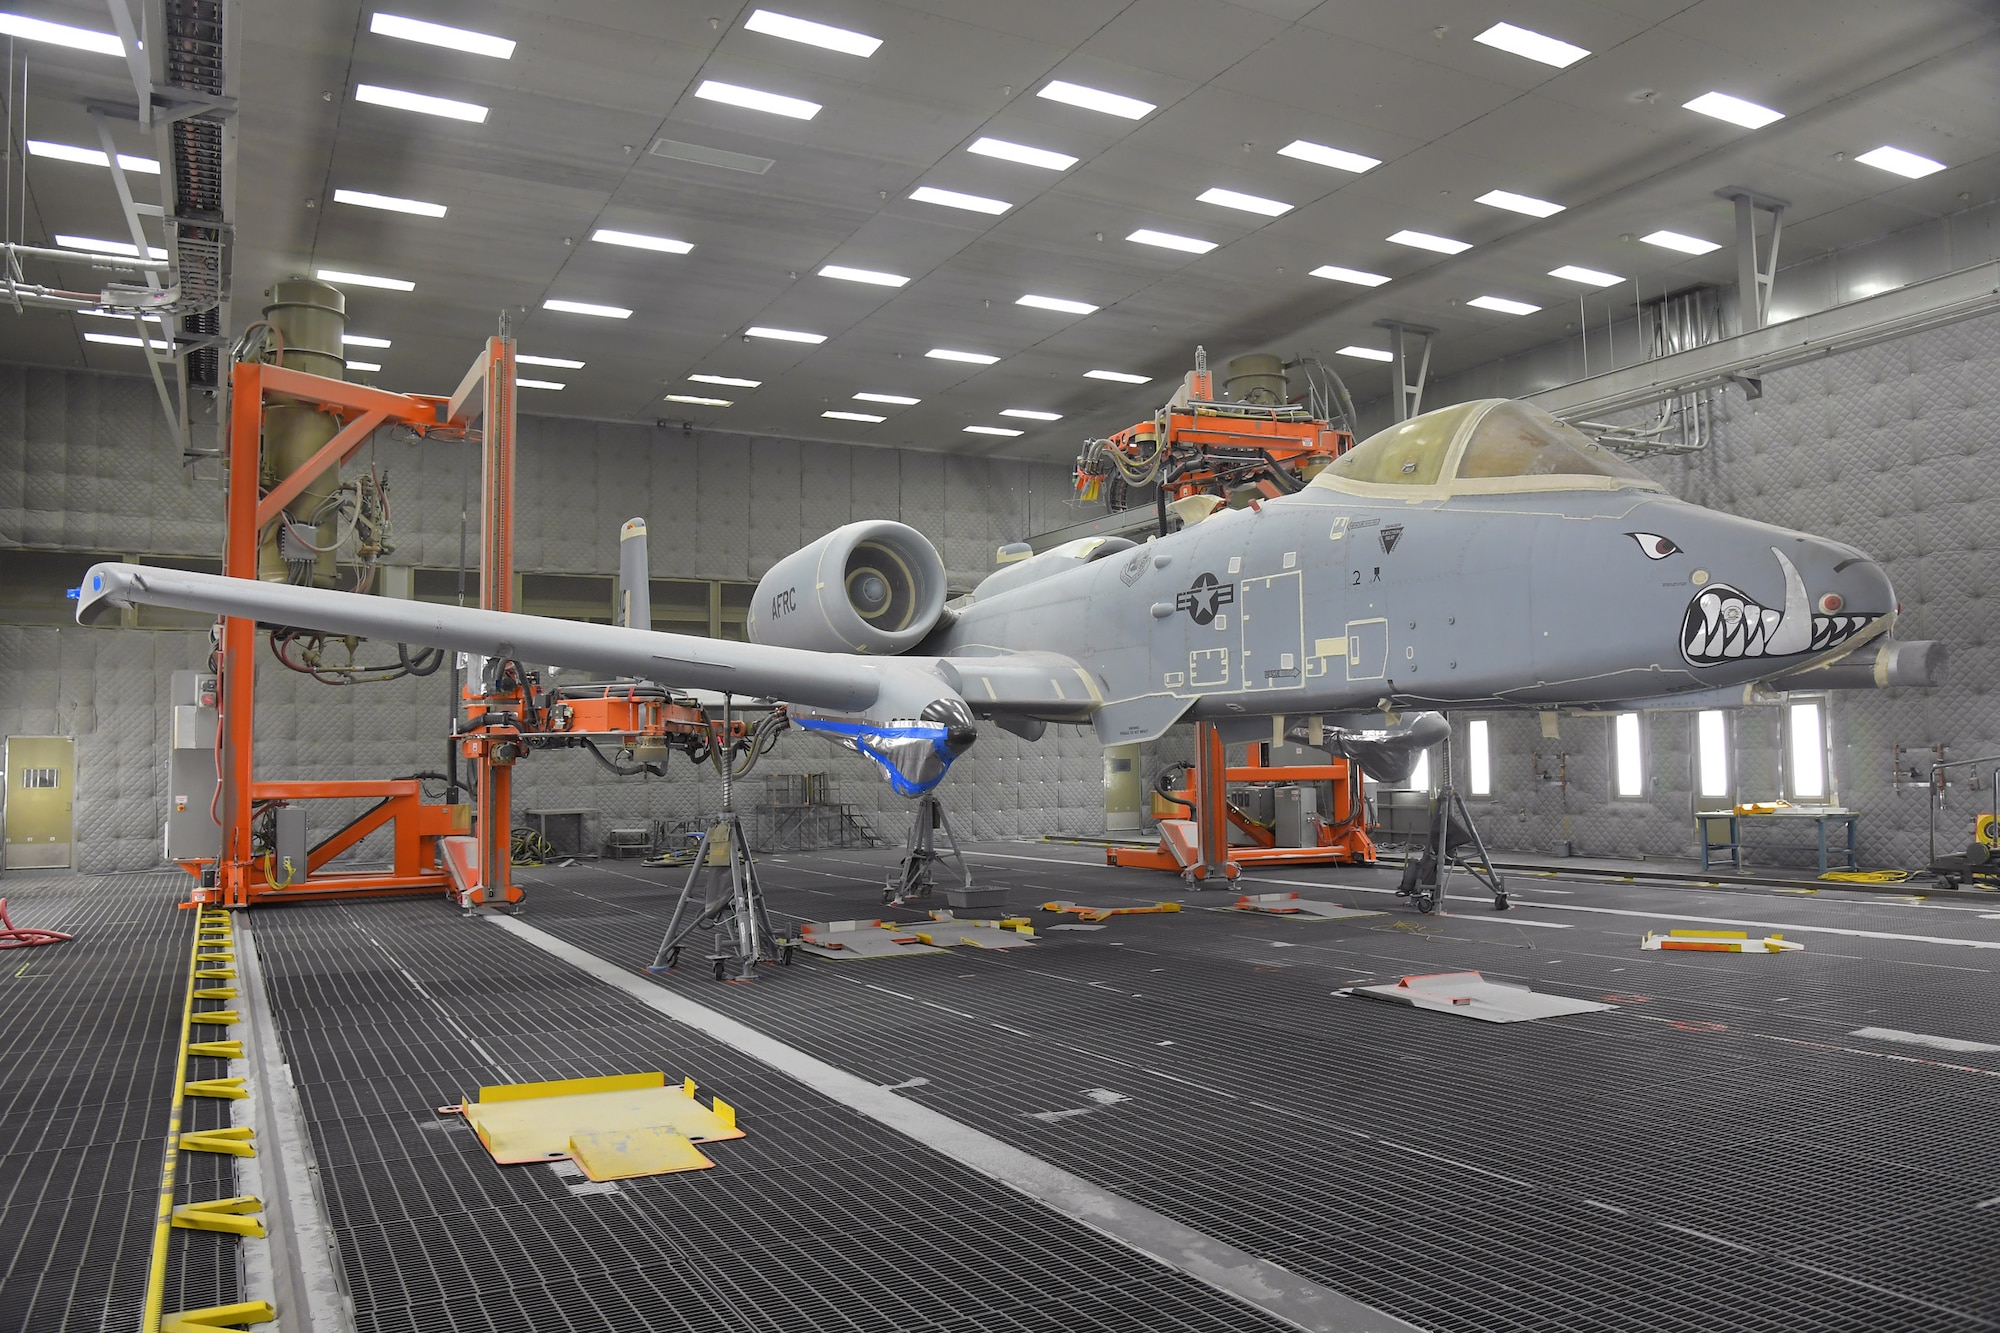 An A-10 aircraft sits on jacks in a lighted depaint facility with two orange depainting robots flanking it in the background.